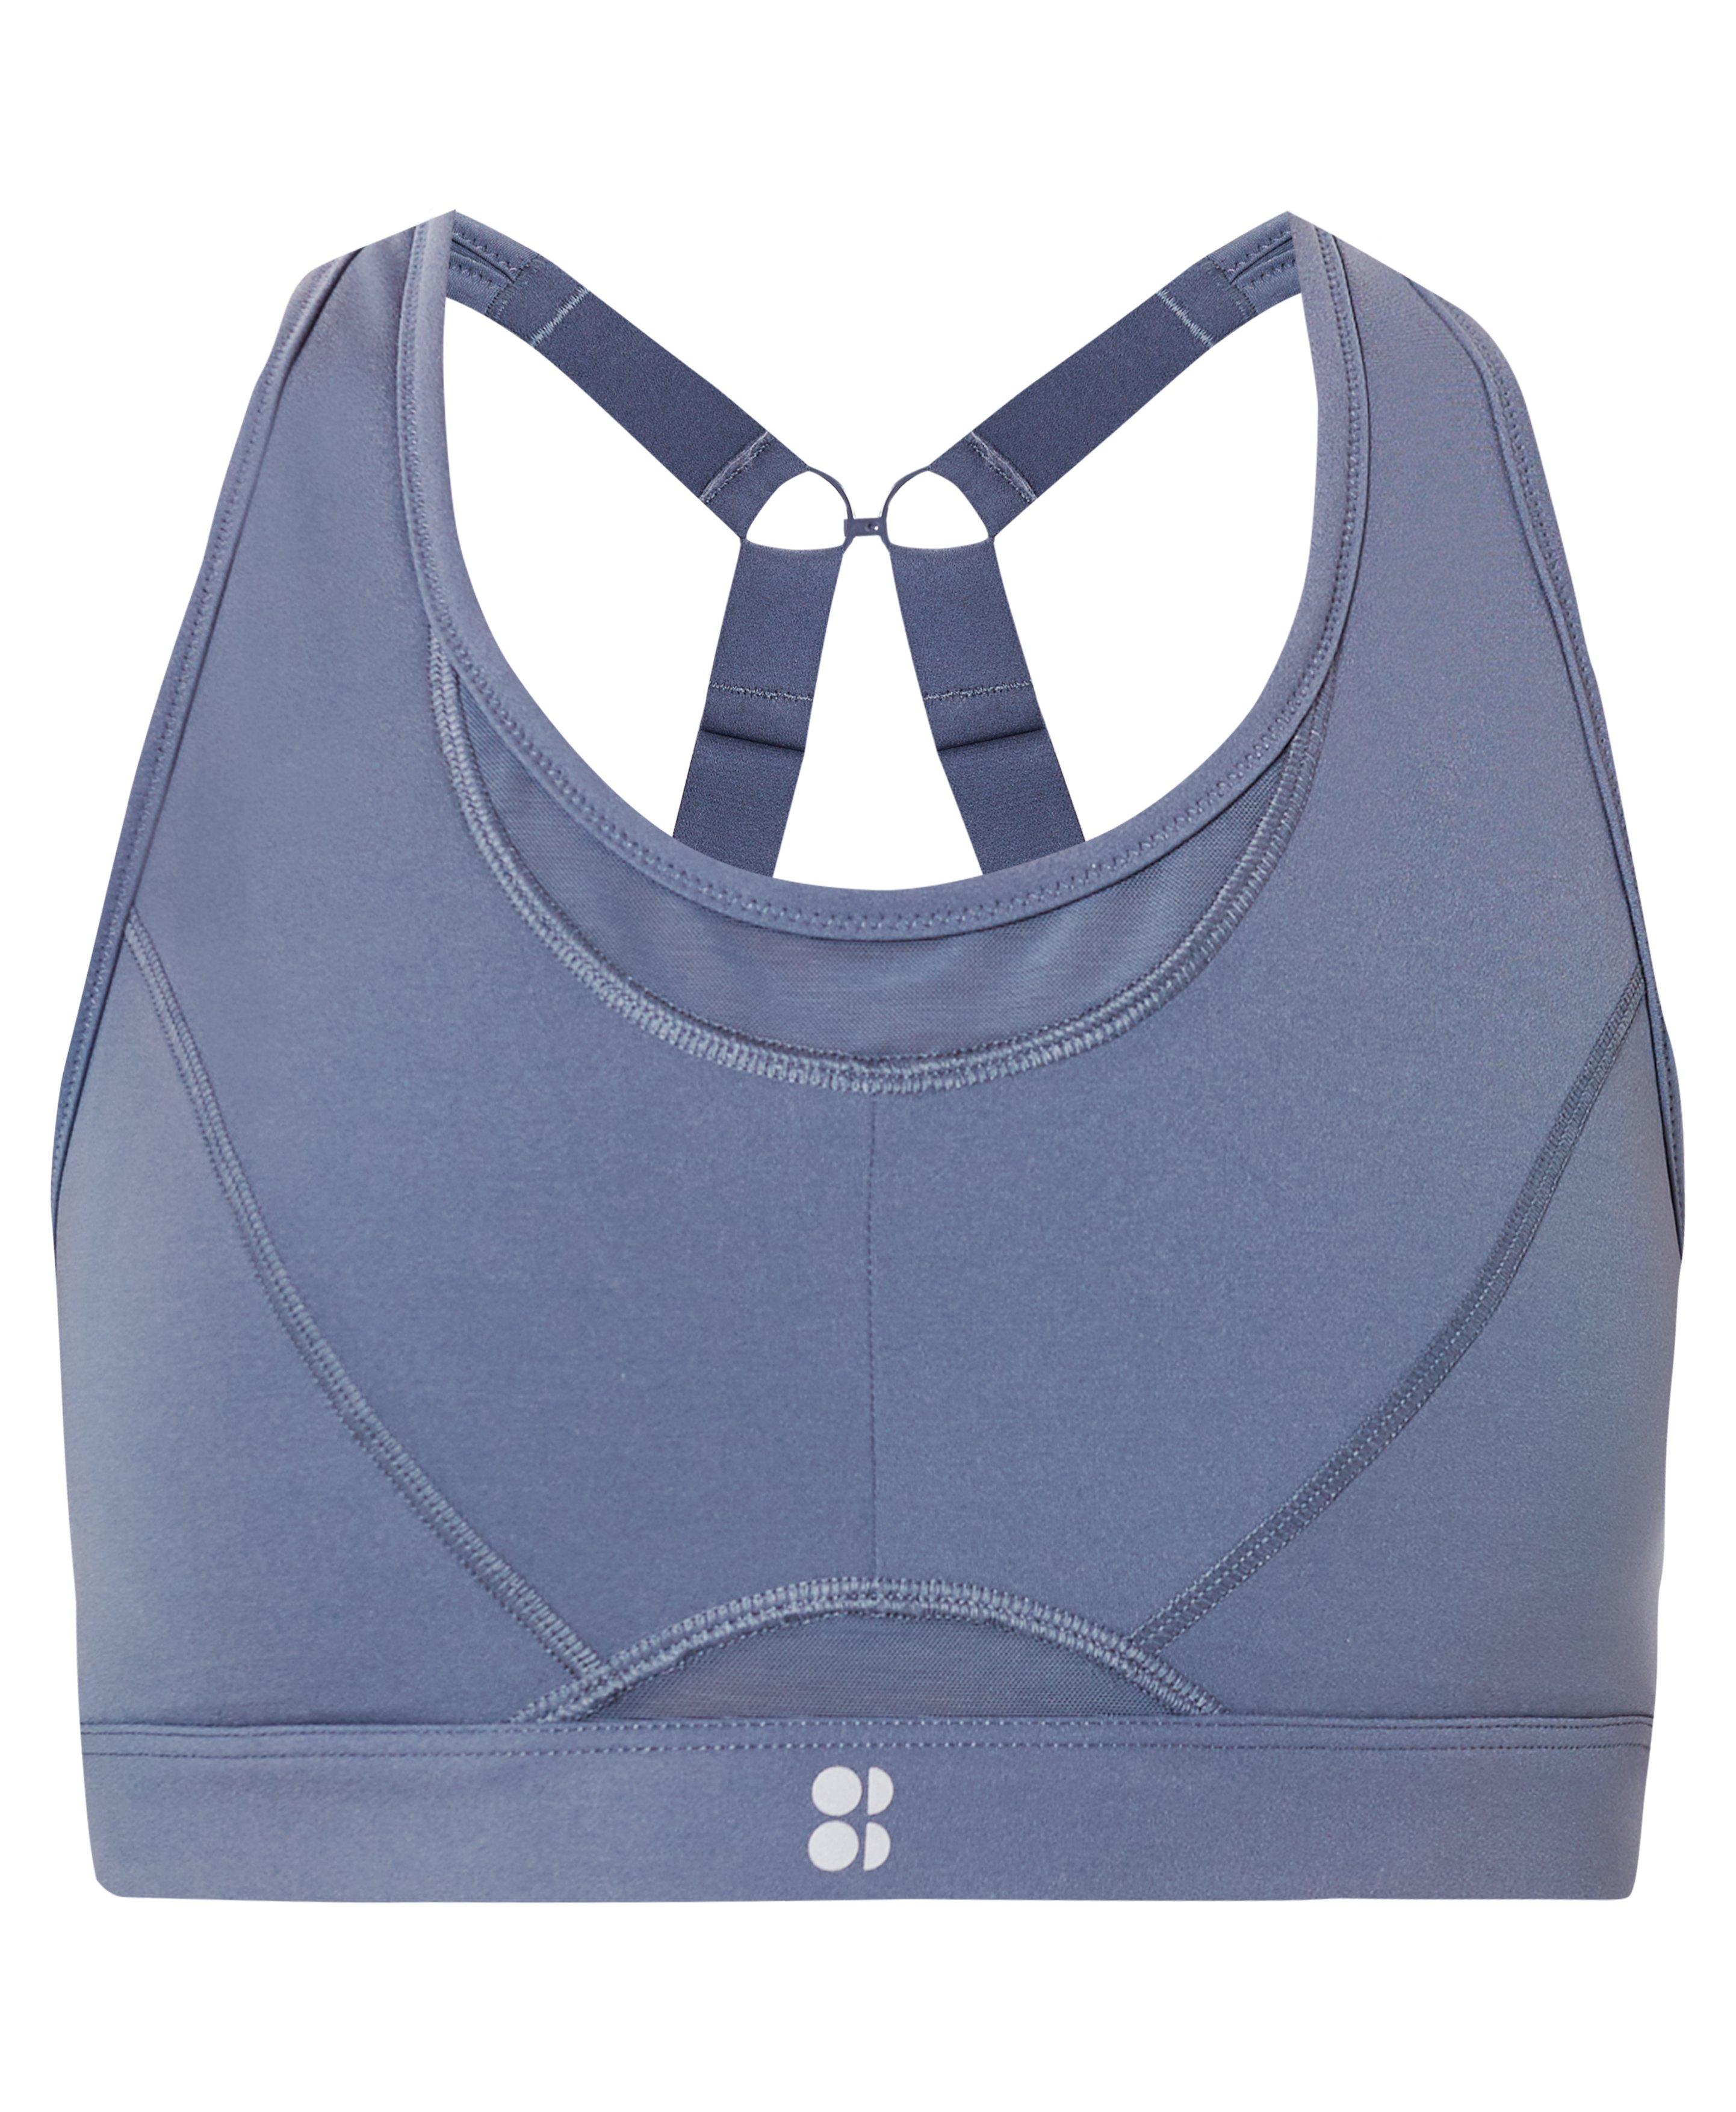 Sweaty Betty Victory Running High Impact Sports Bra Black Size 34A SB523A -  $24 - From Emily